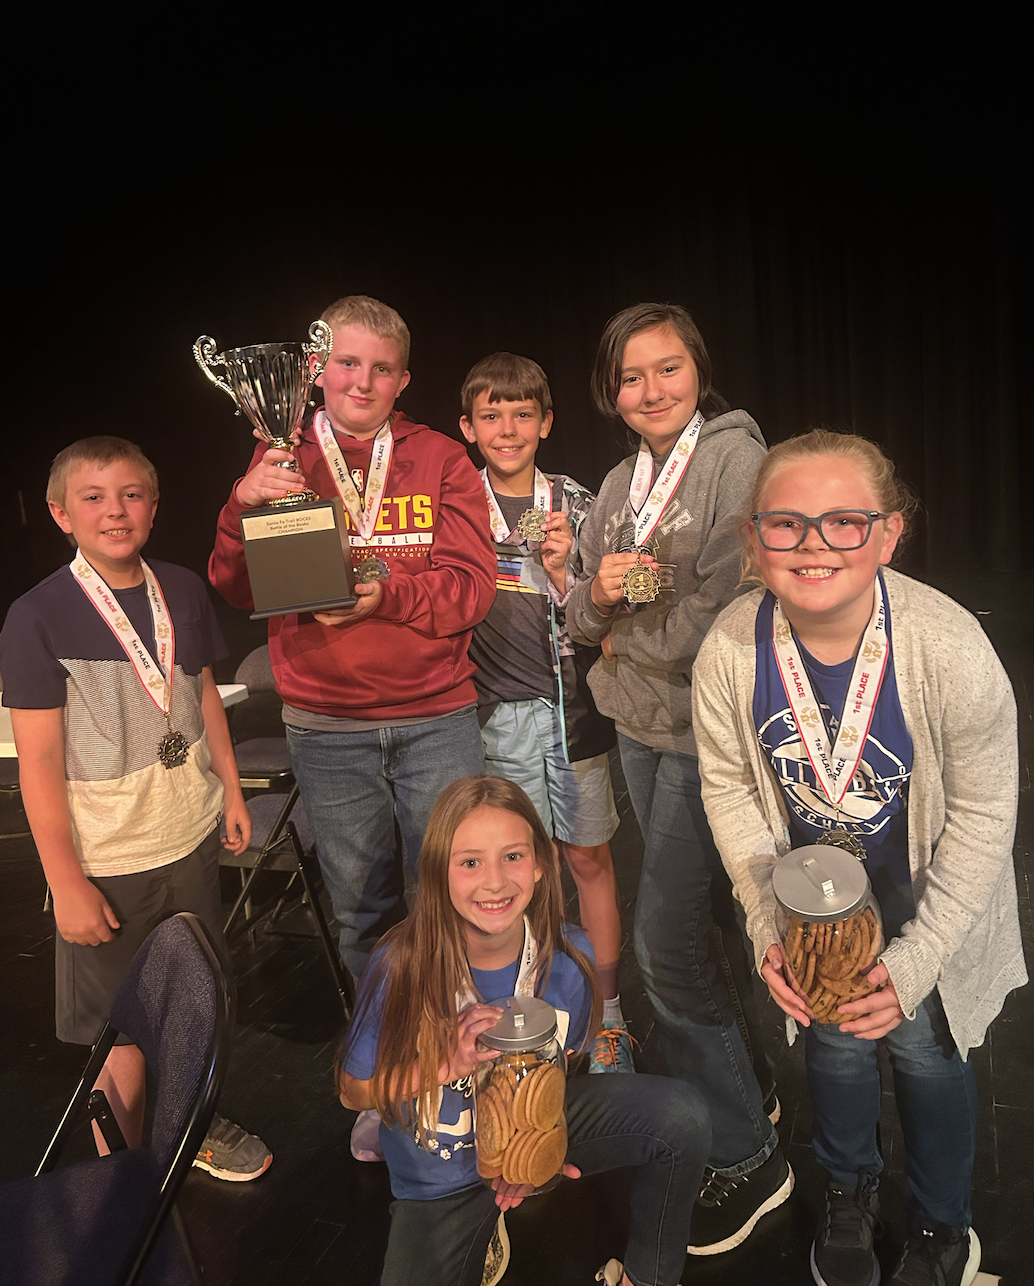 Students in the Wiley School District won the Battle of the Books contest against other districts.